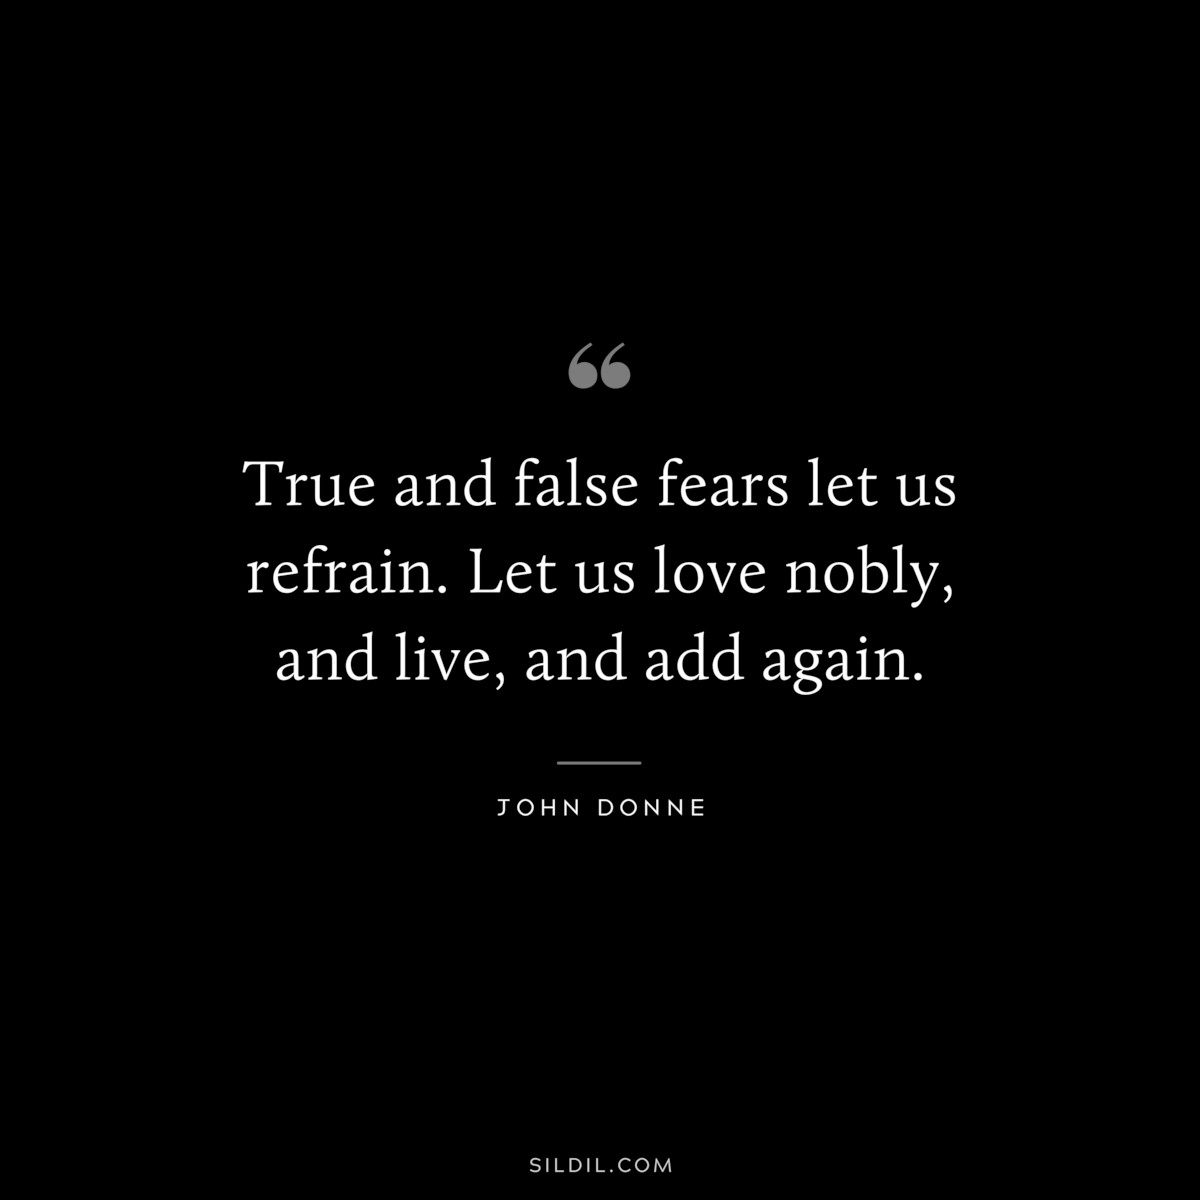 True and false fears let us refrain. Let us love nobly, and live, and add again. ― John Donne